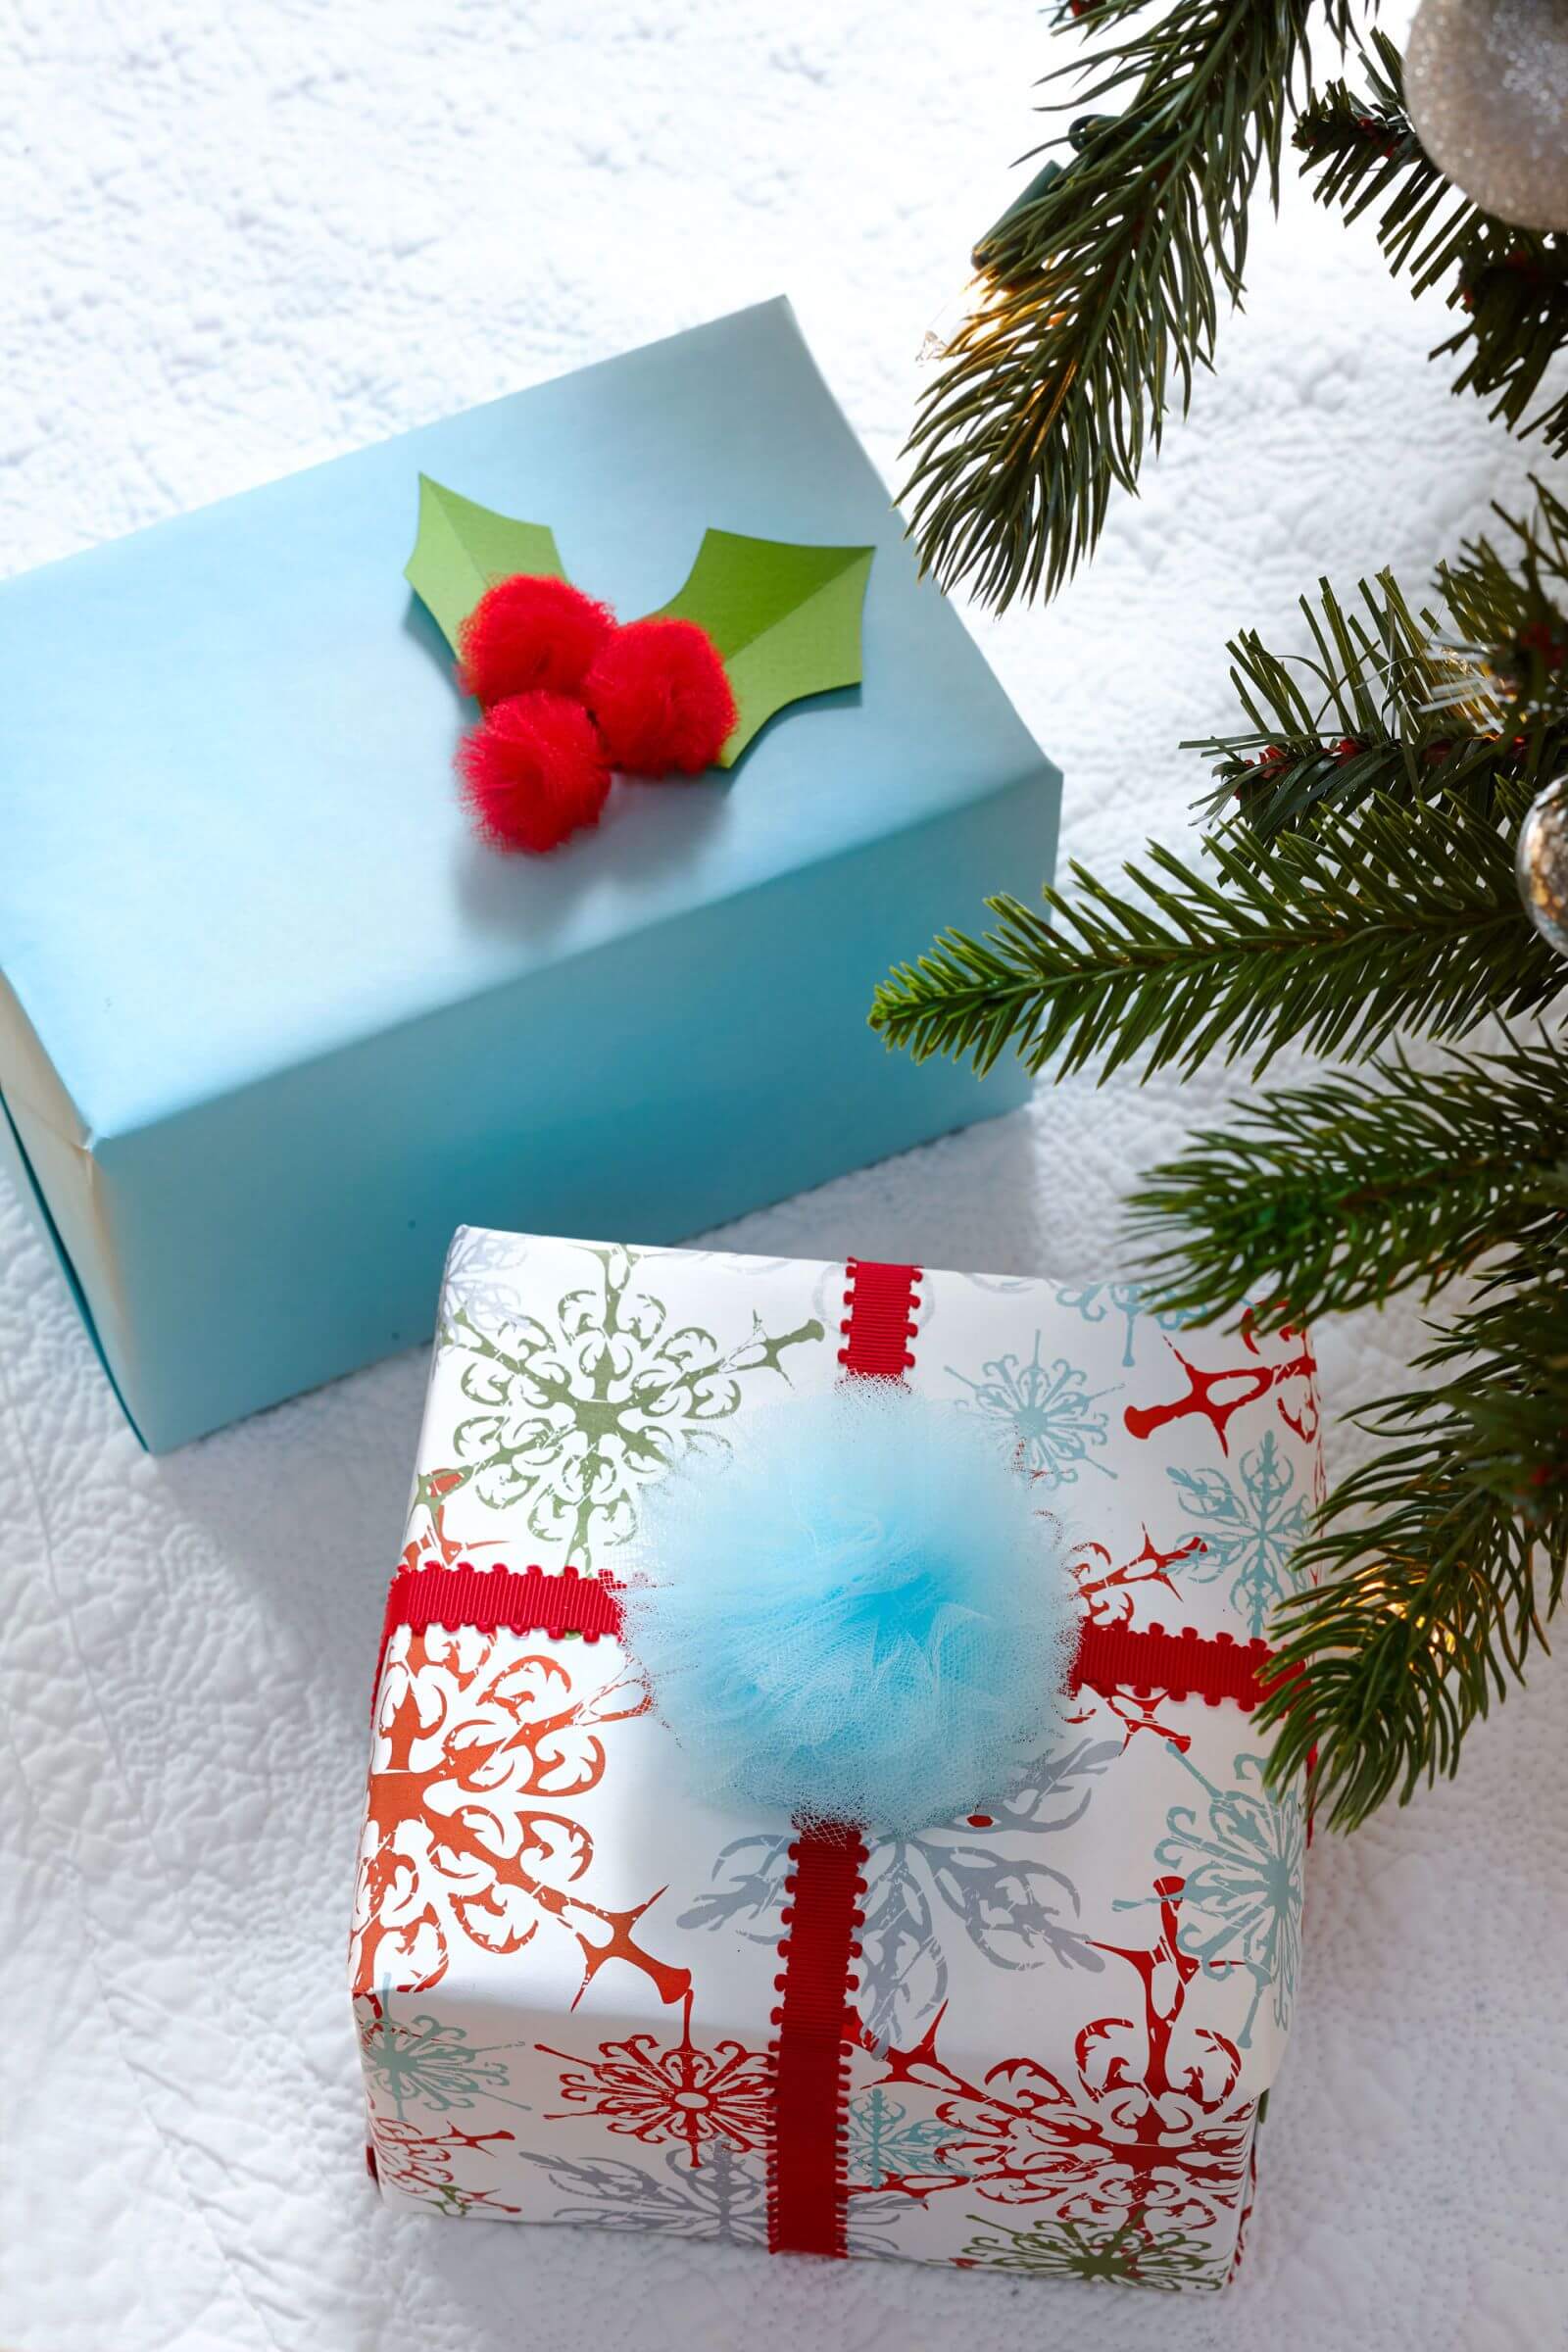 A blue box with a red pom pom on top of it next to
